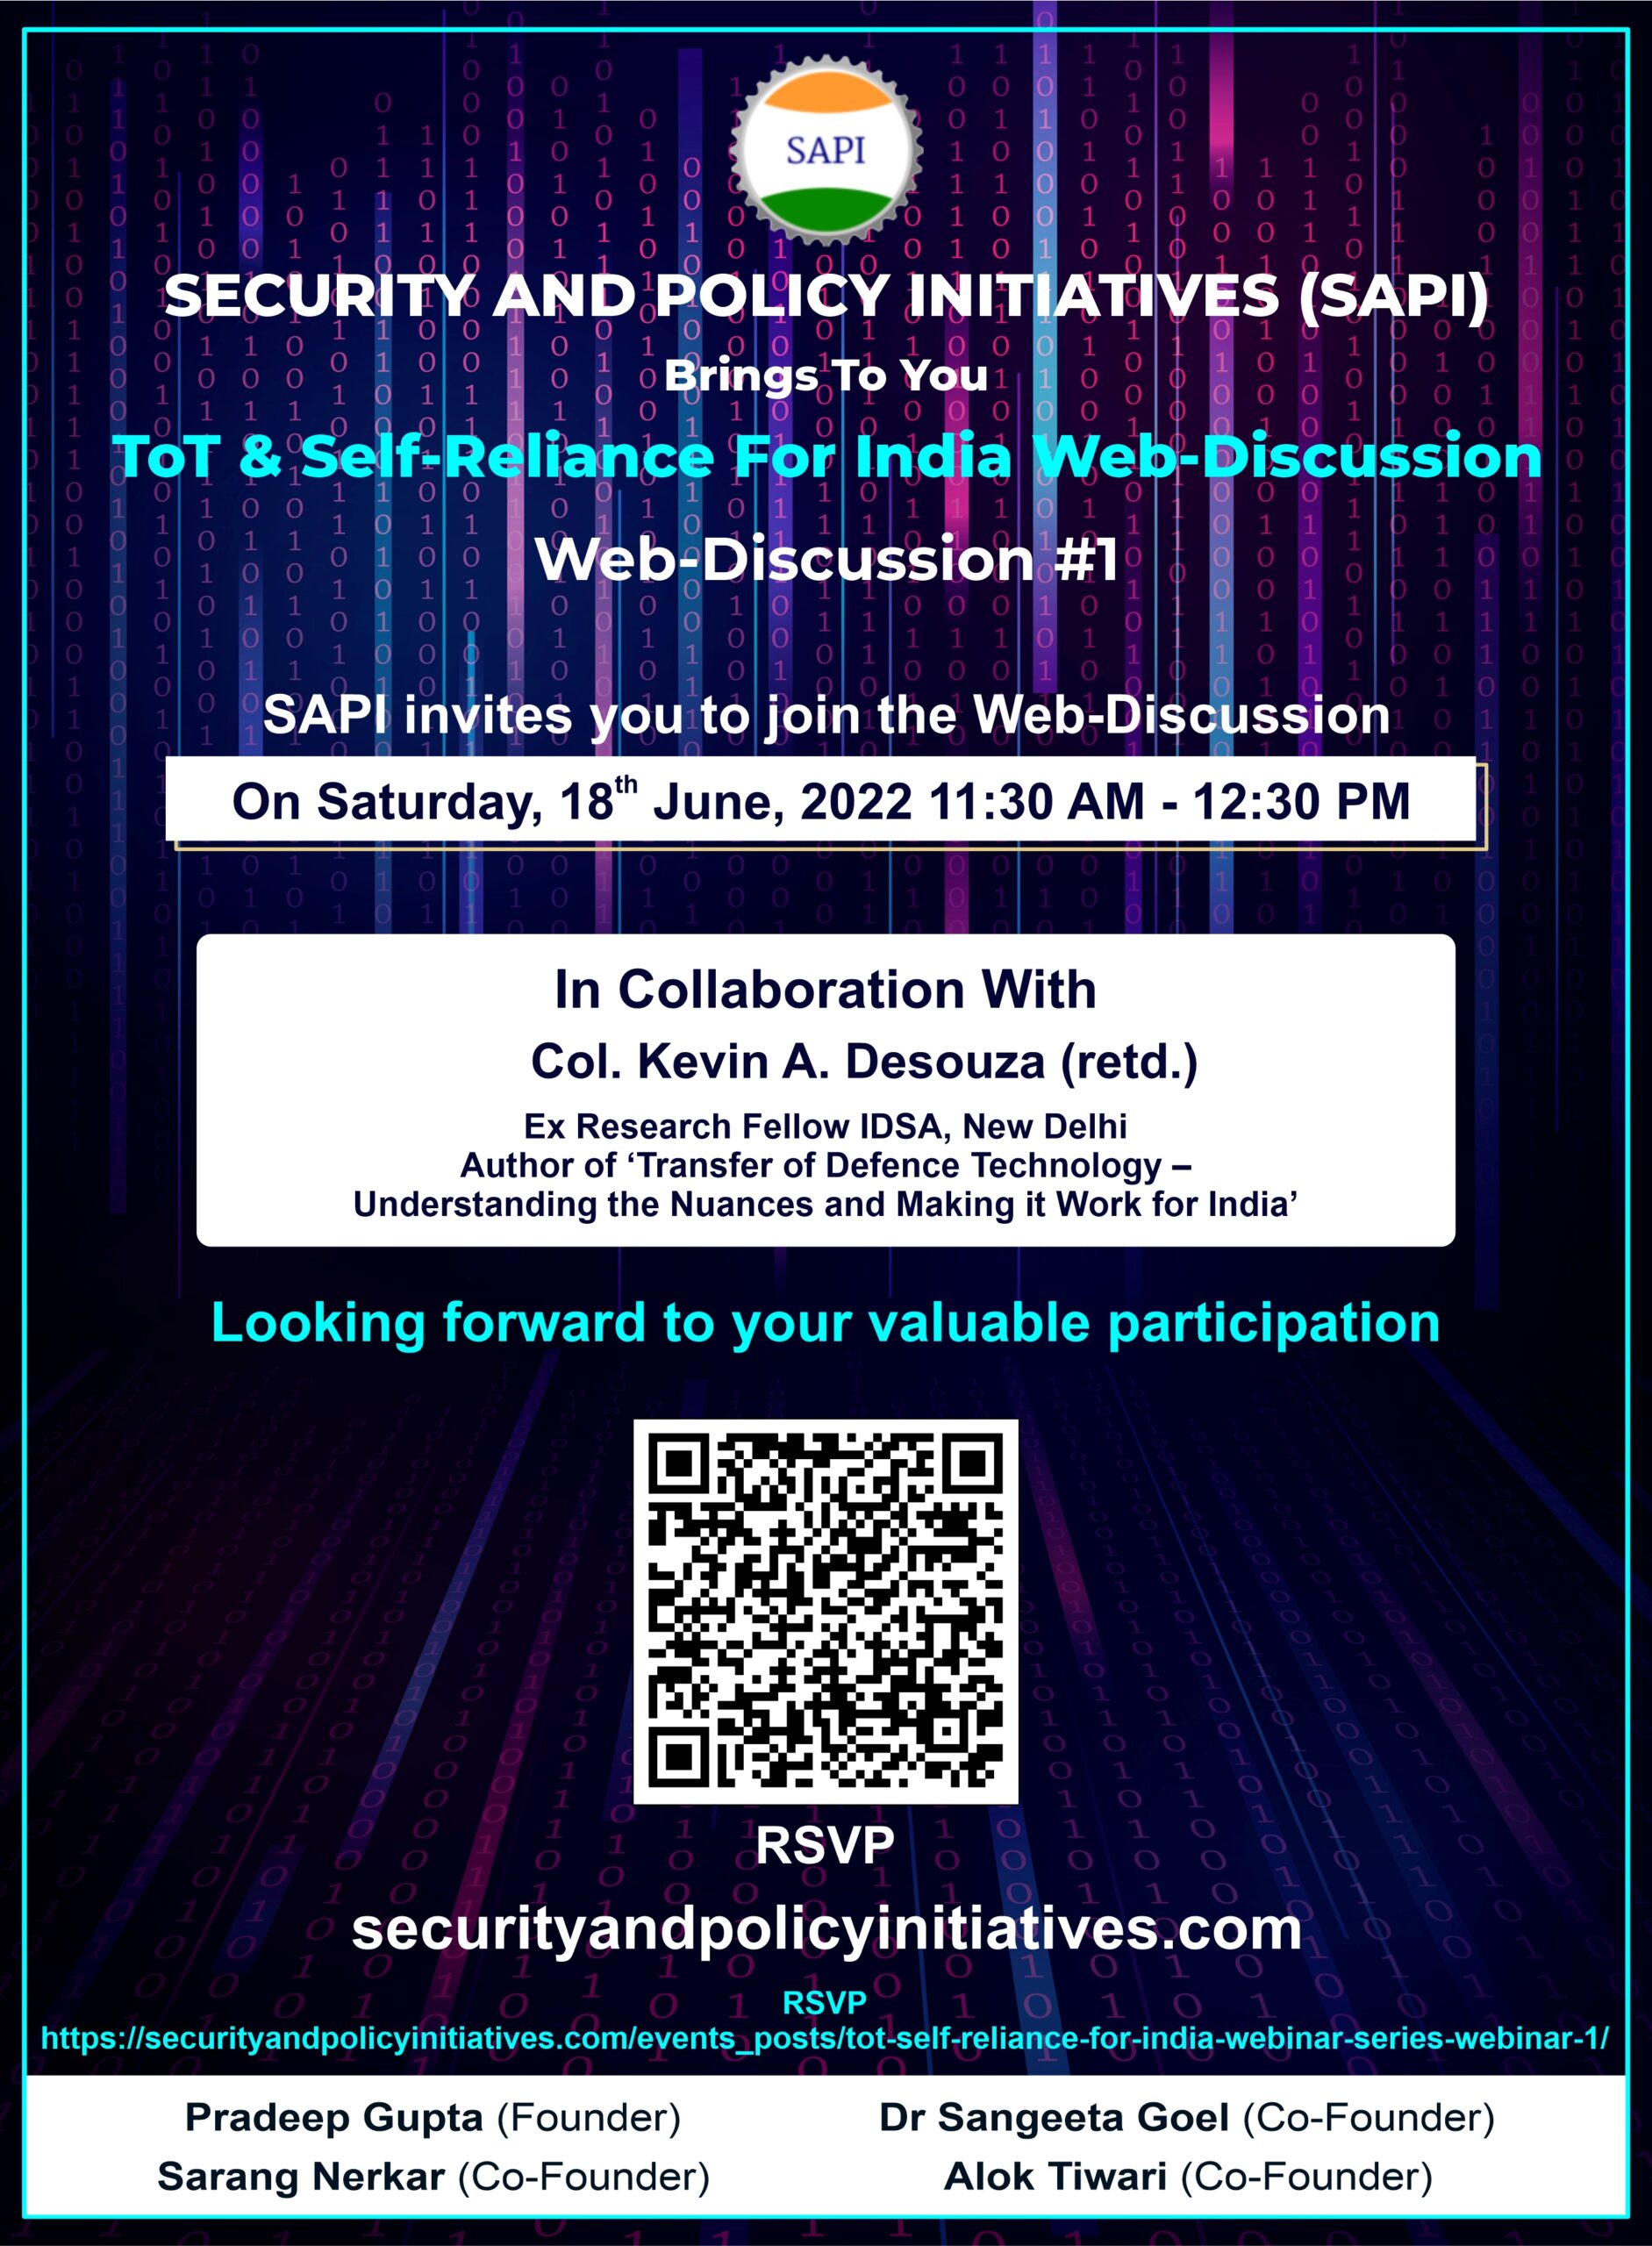 ToT & Self-Reliance For India Webinar Series - Web-Discussion 1